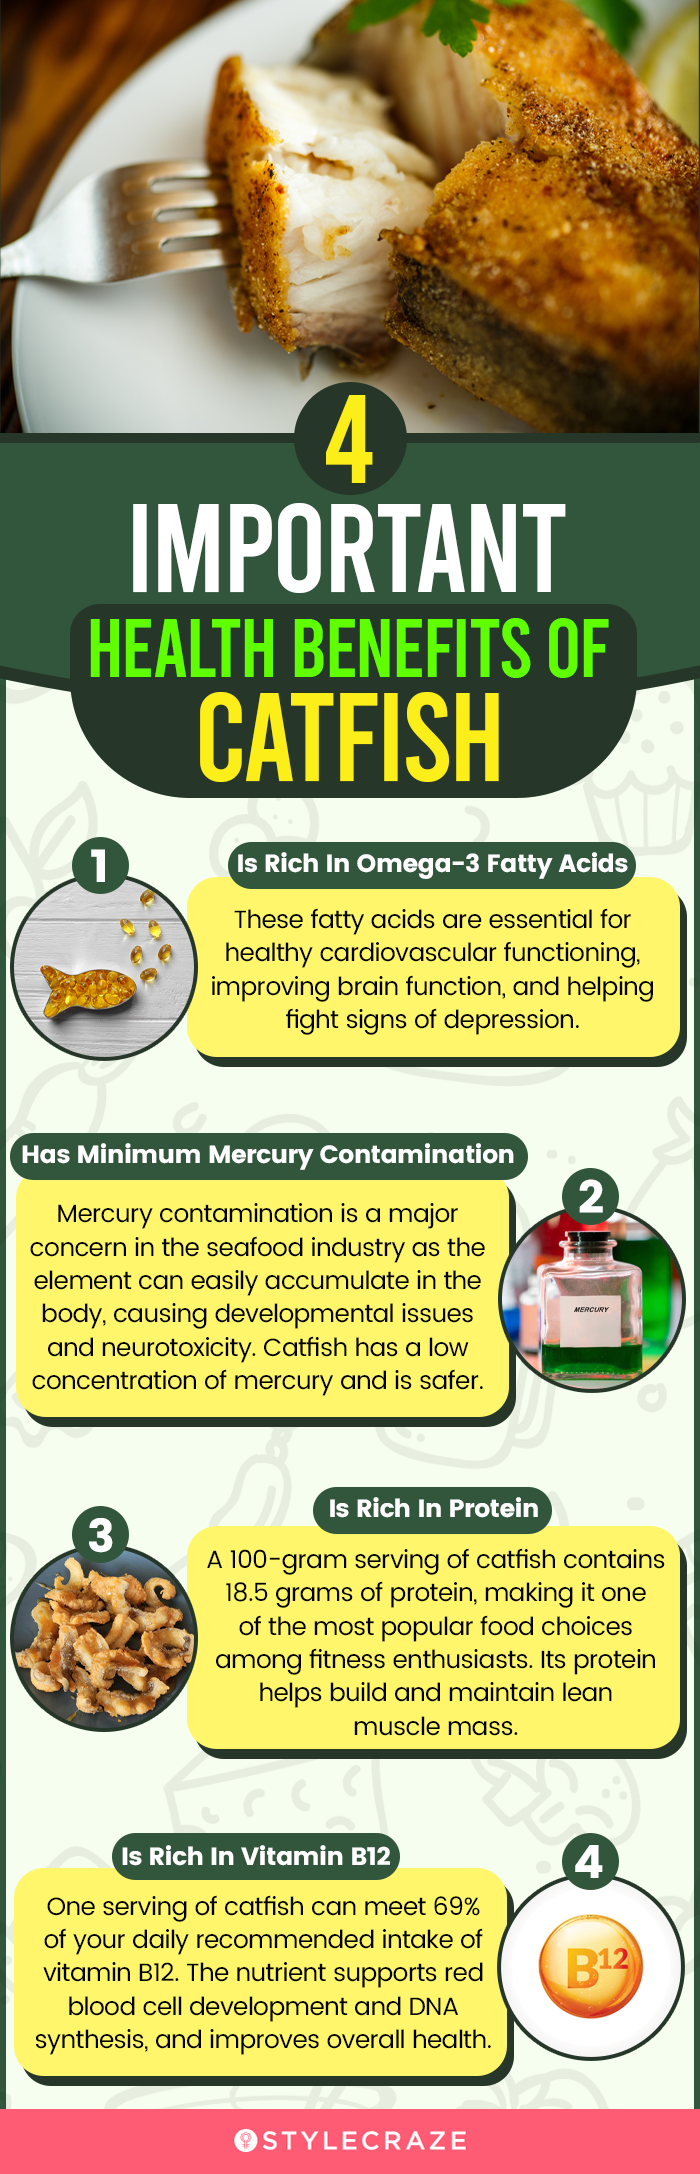 4 important health benefits of catfish (infographic)